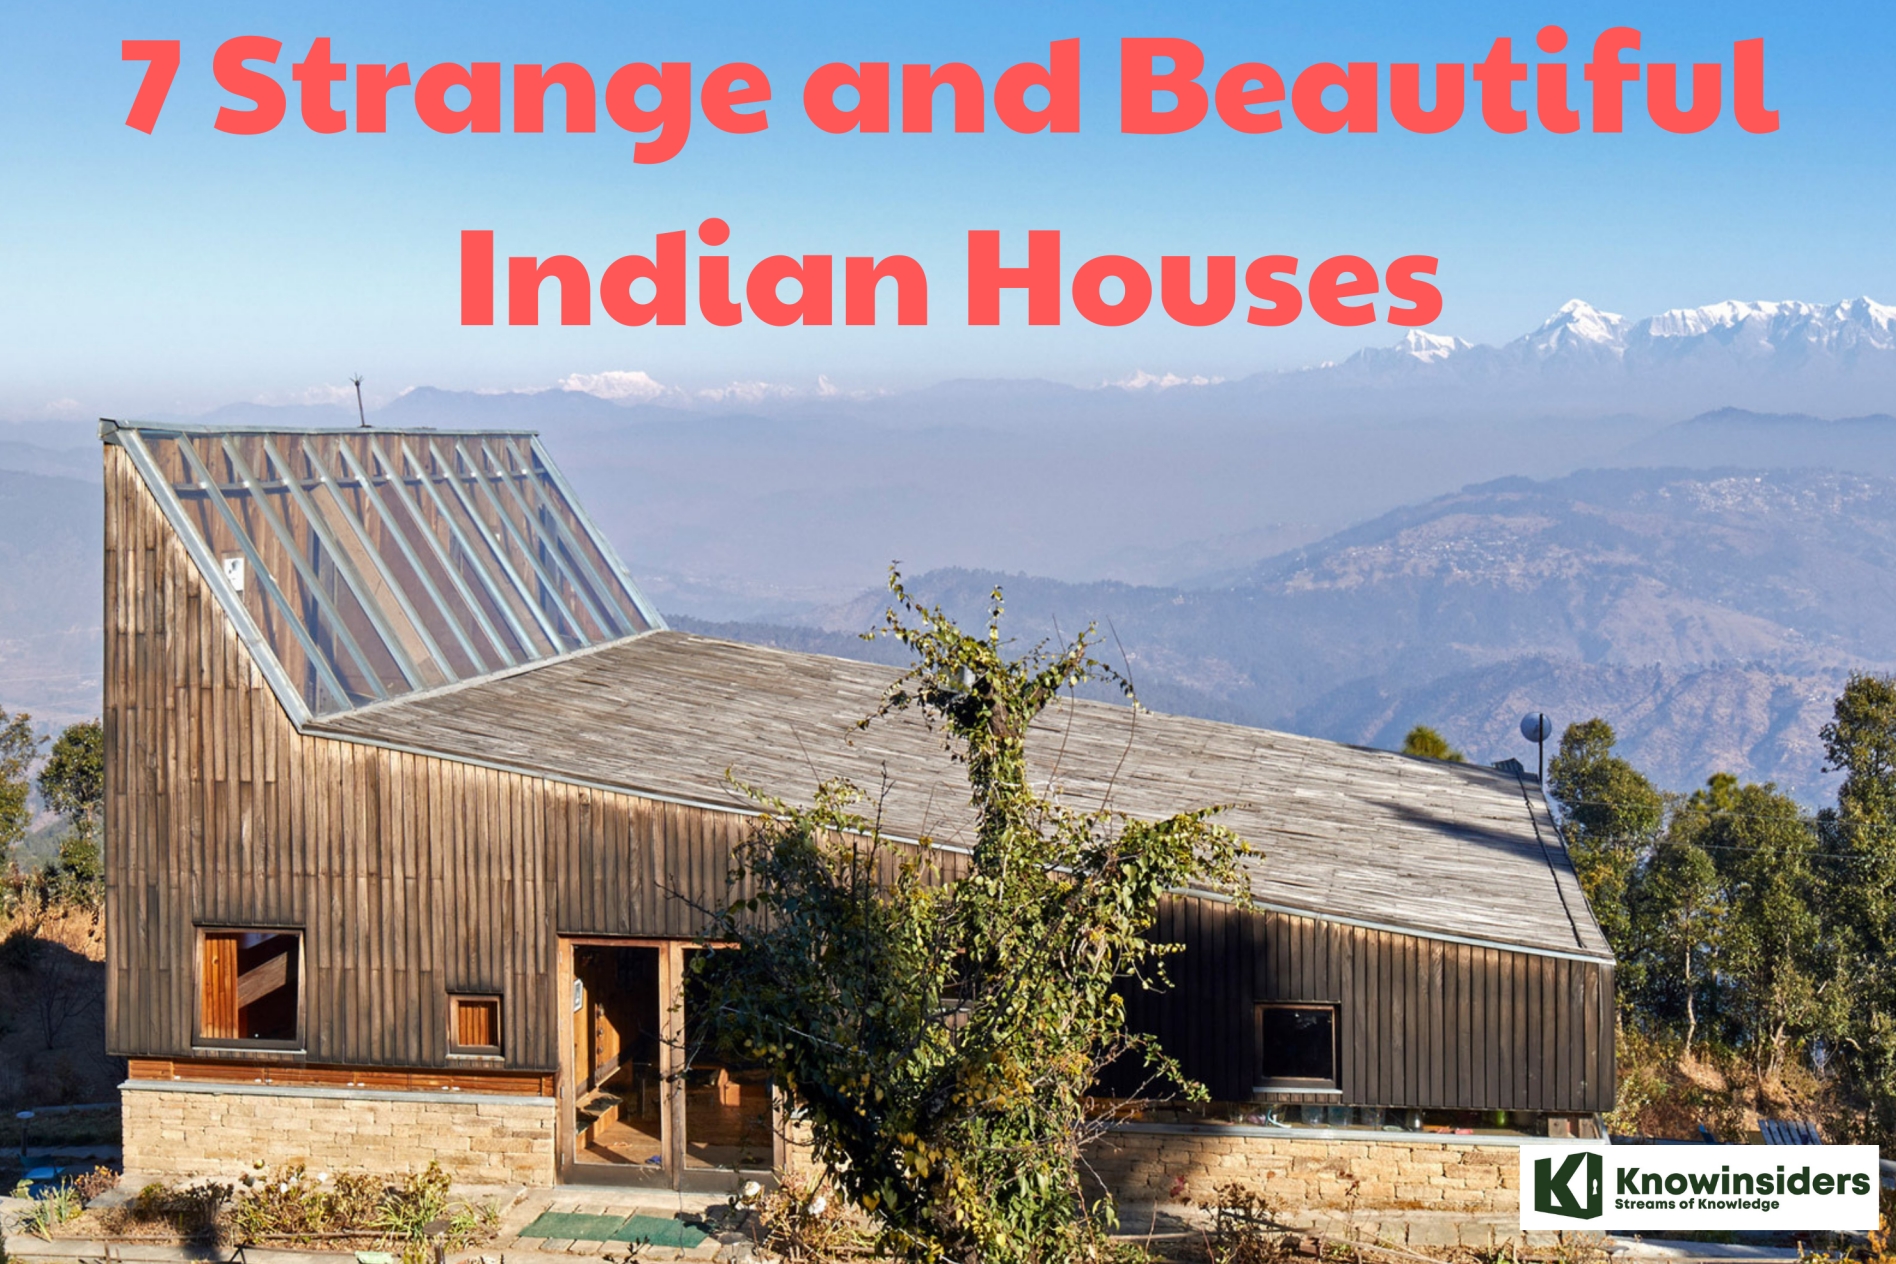 7 Strange and Beautiful Indian Houses